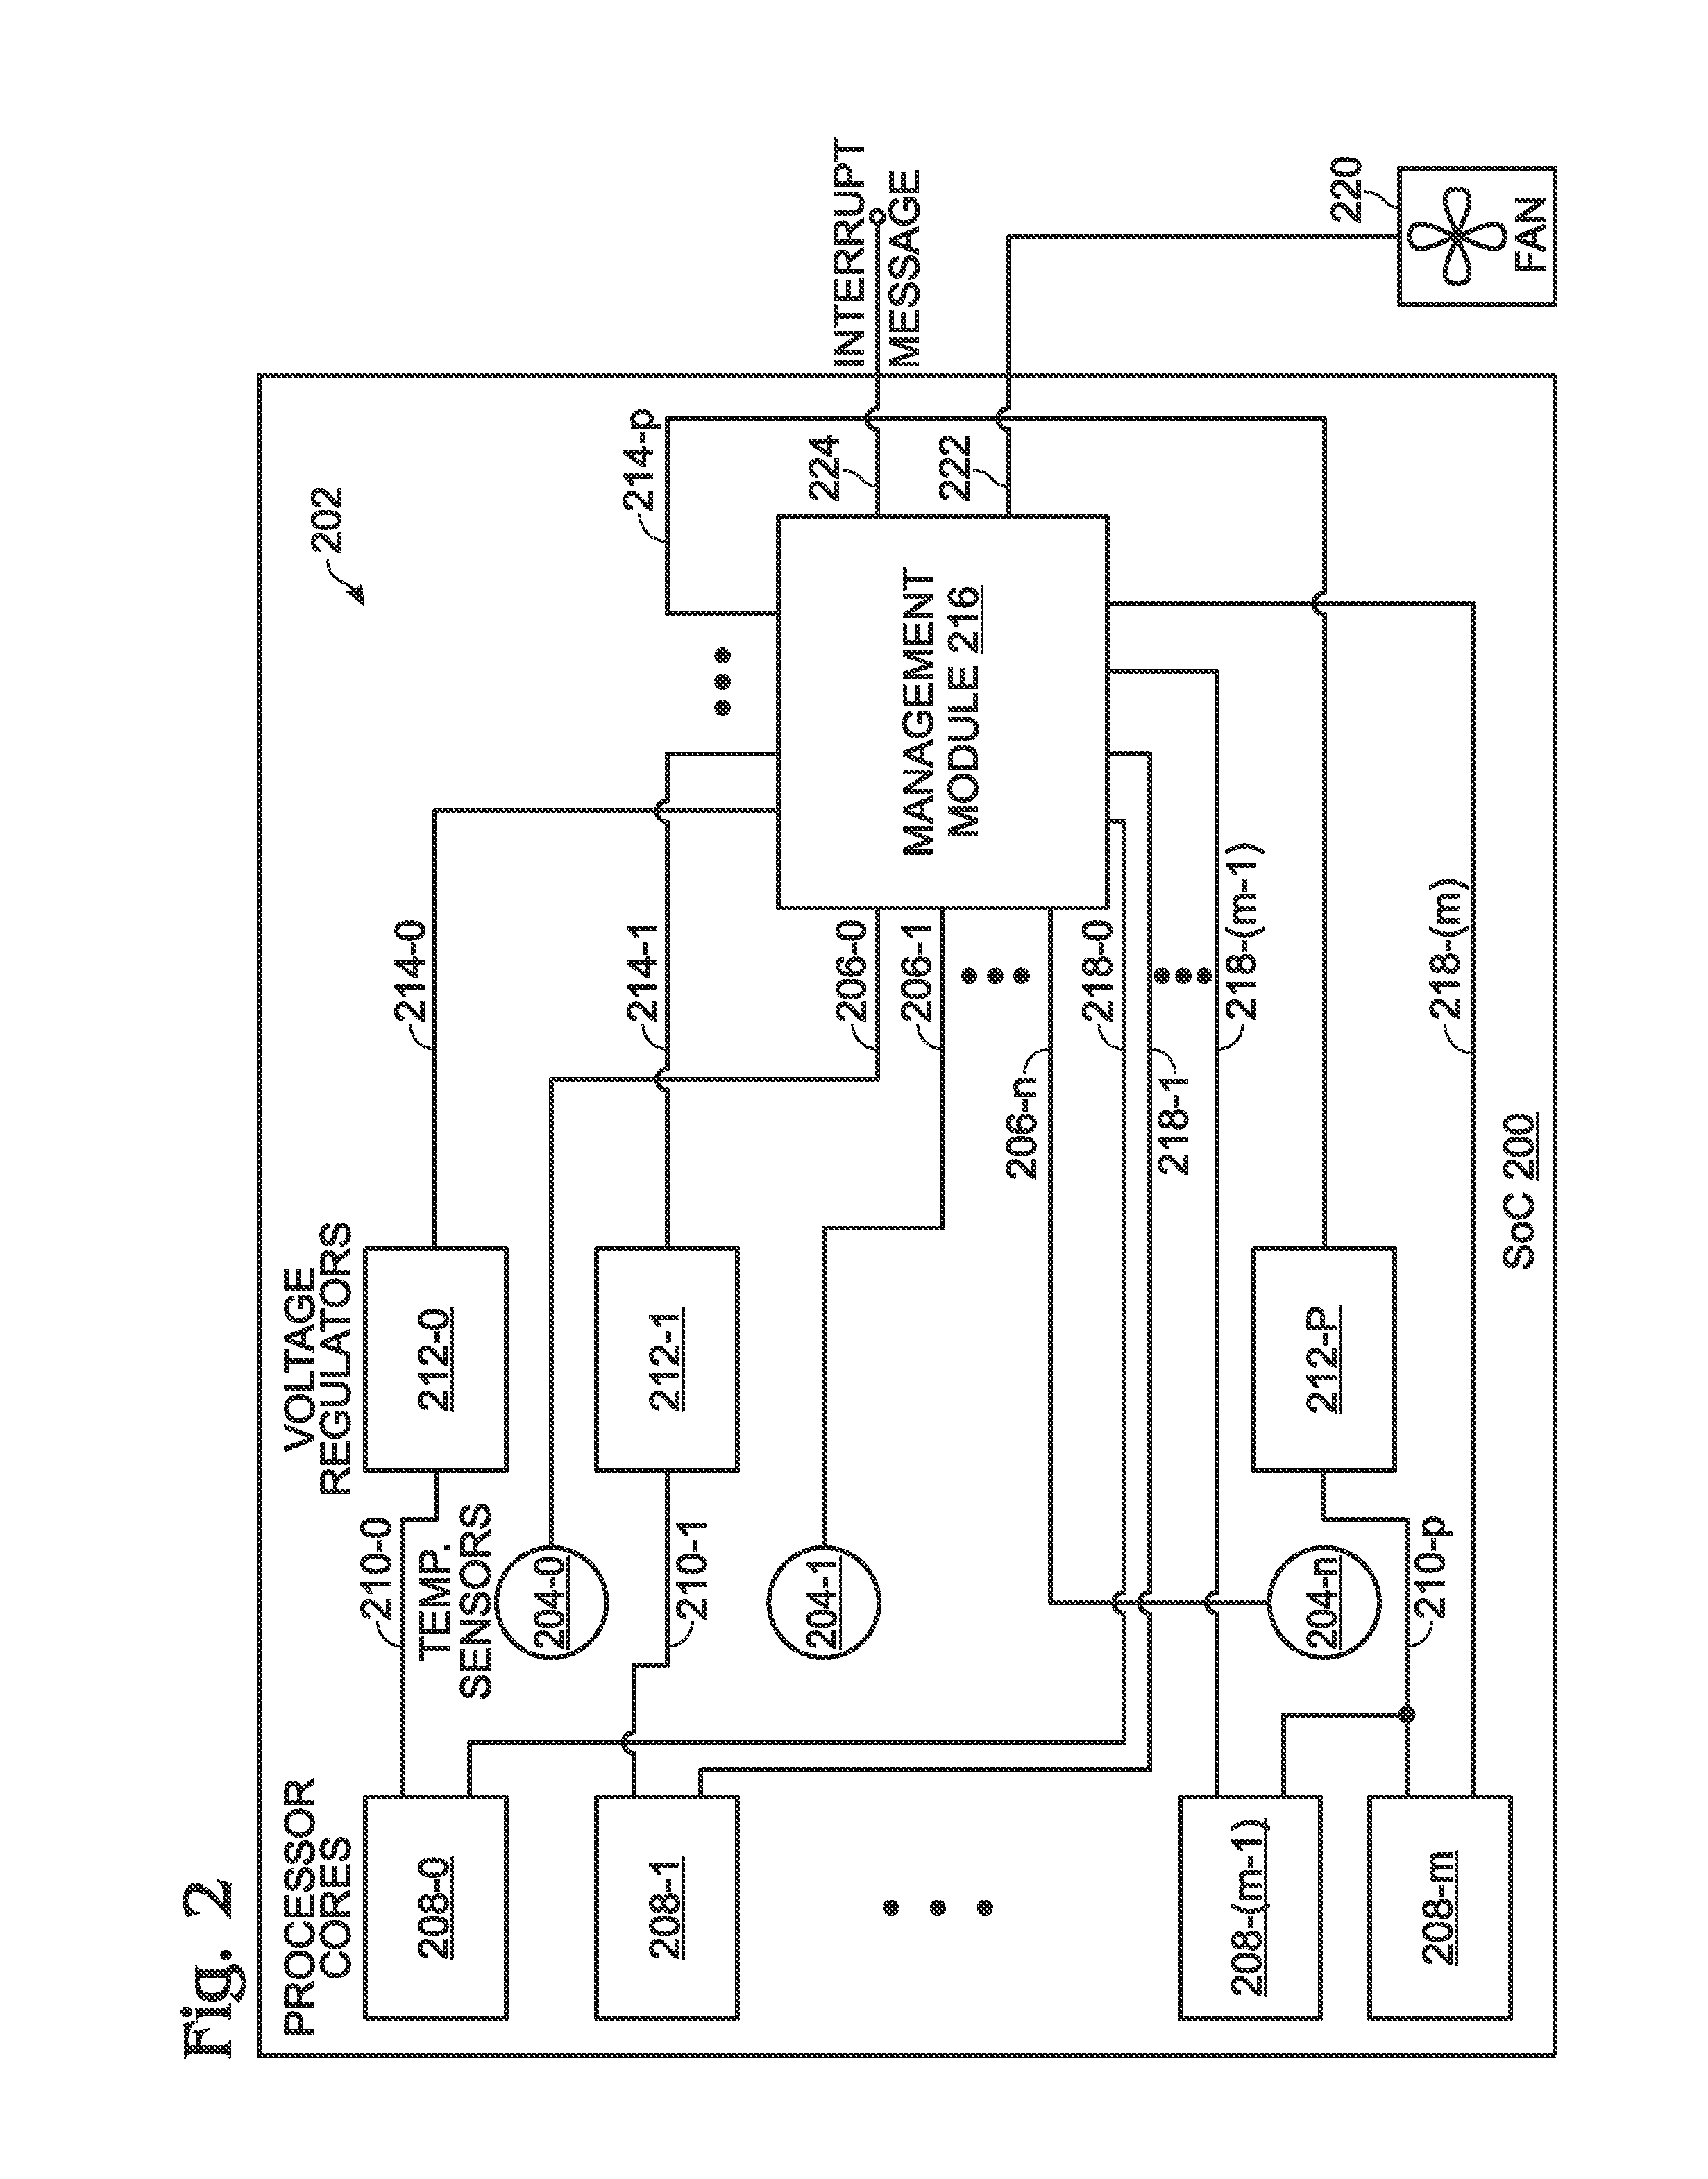 System-on-chip with management module for controlling processor core internal voltages